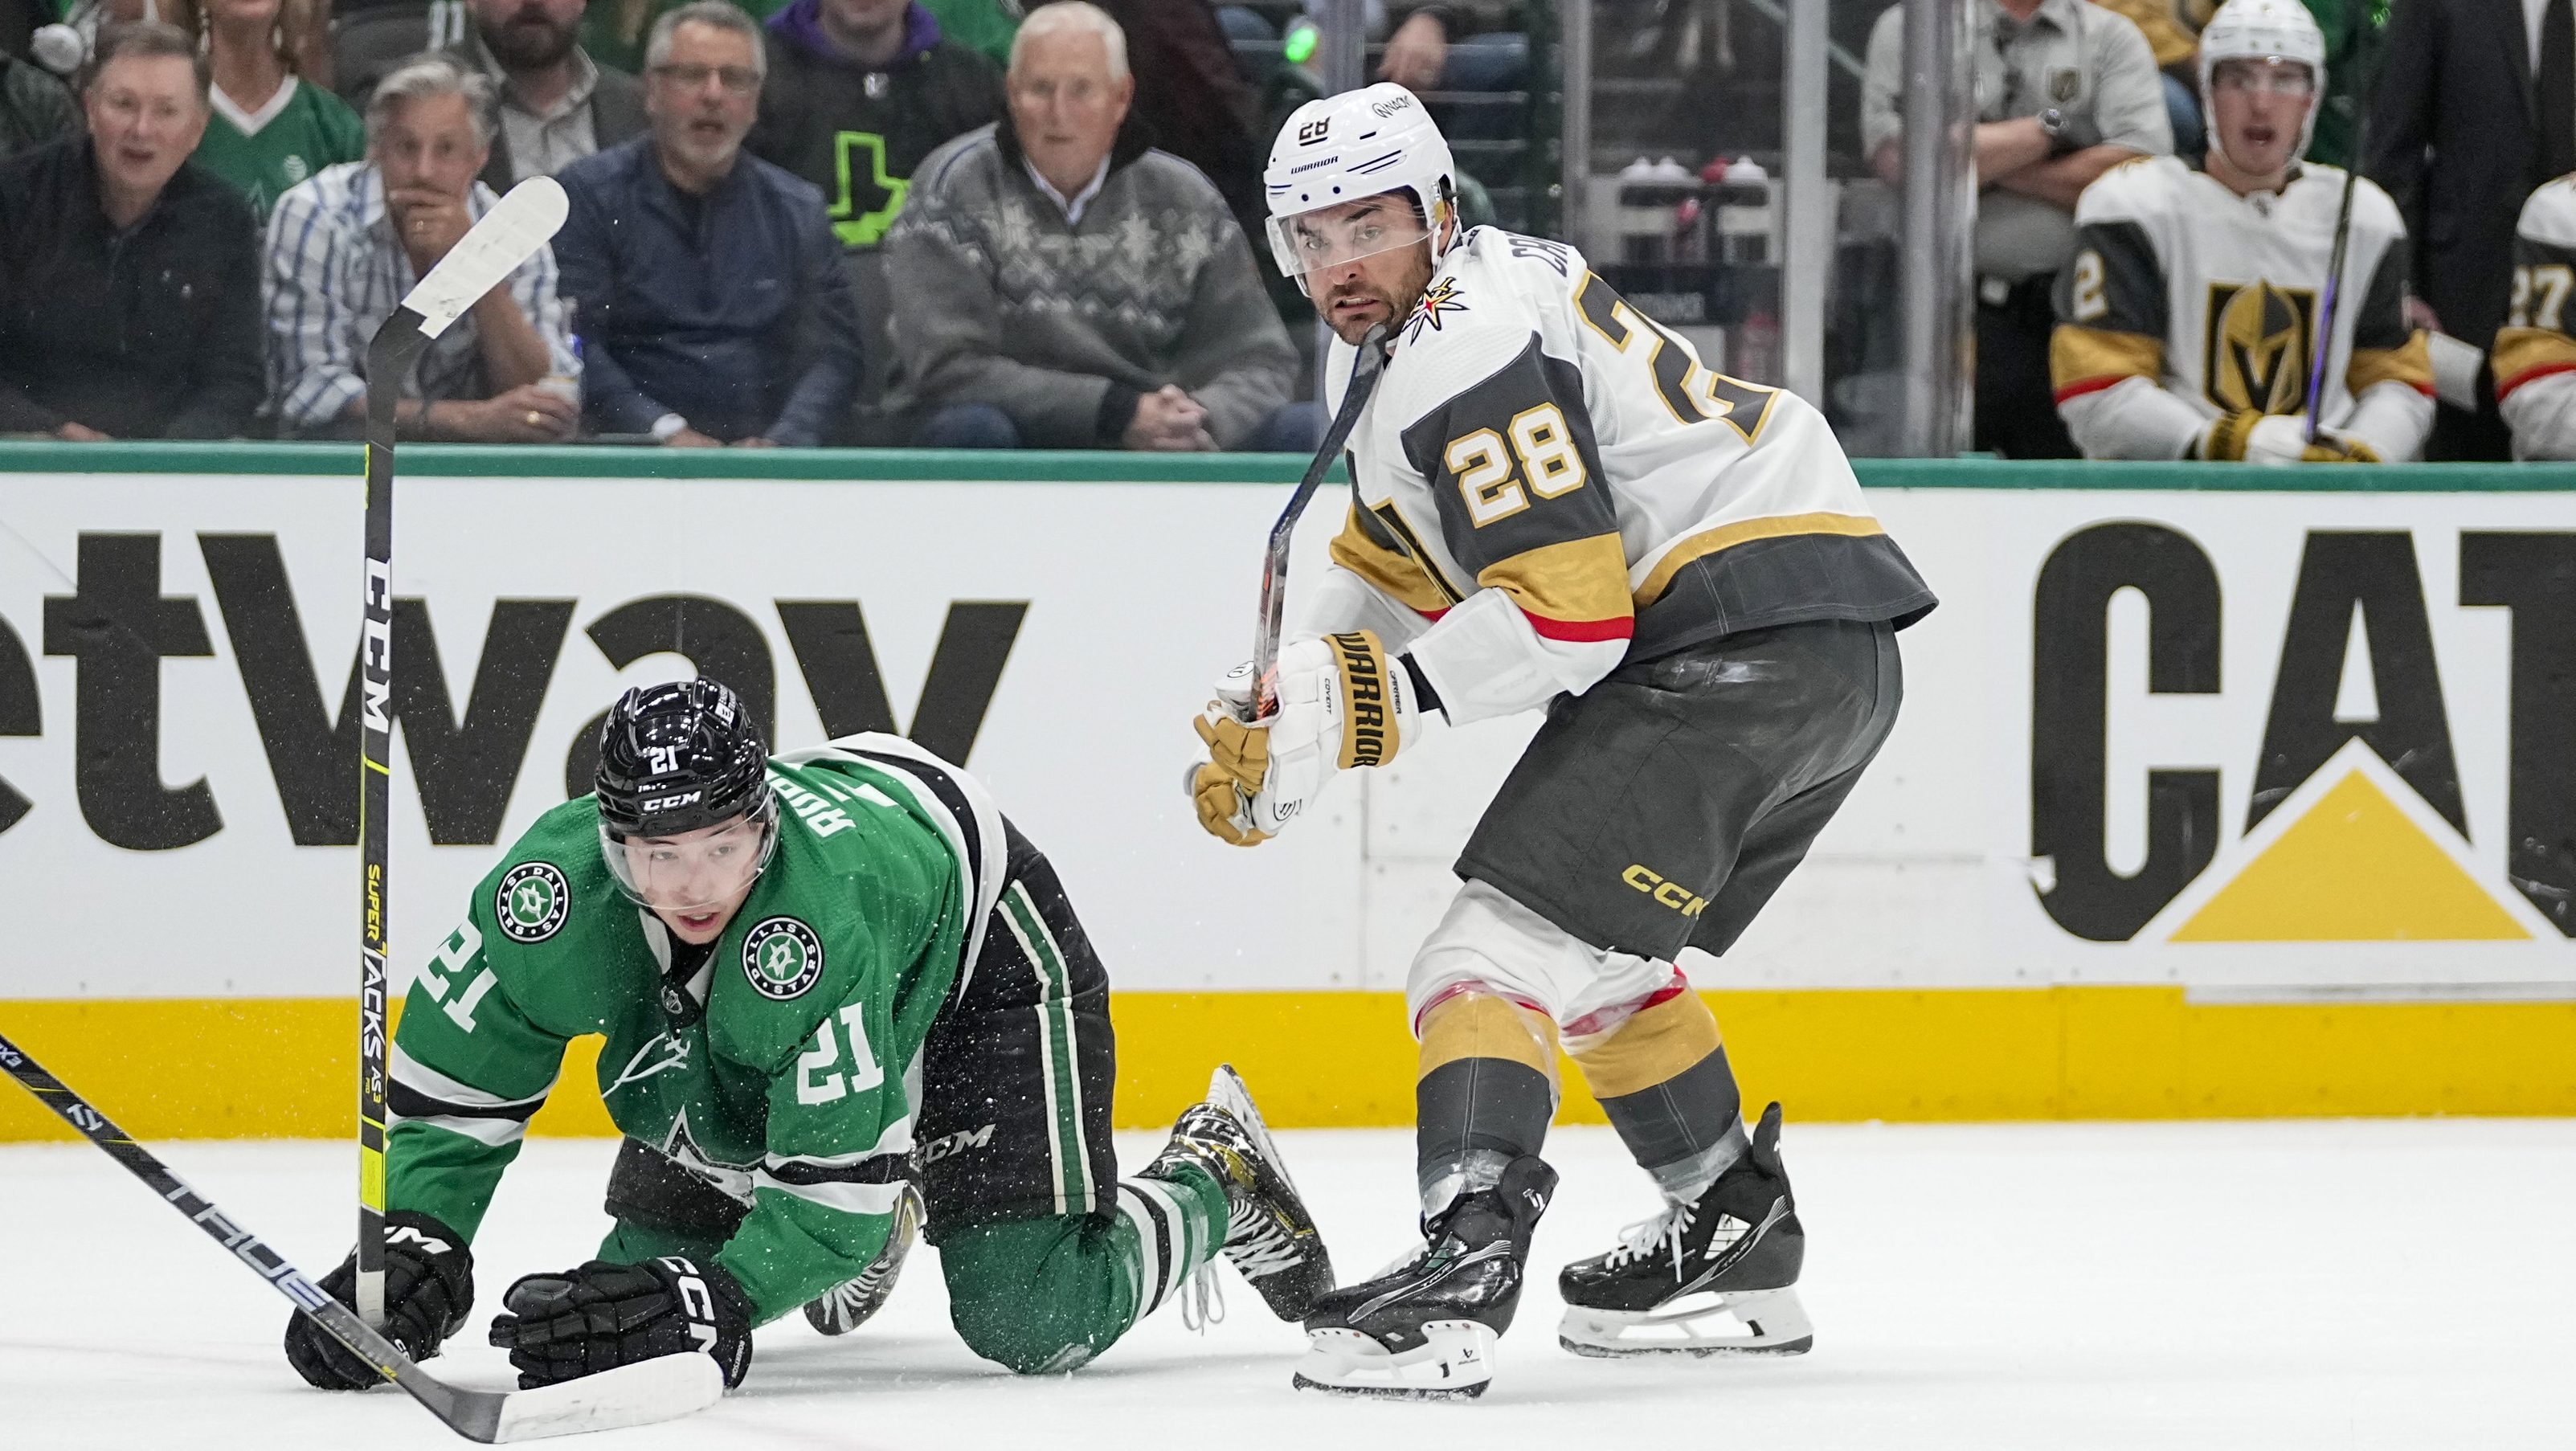 Defending champion Golden Knights beat Stars 3-1, take 2-0 series lead
home to Vegas